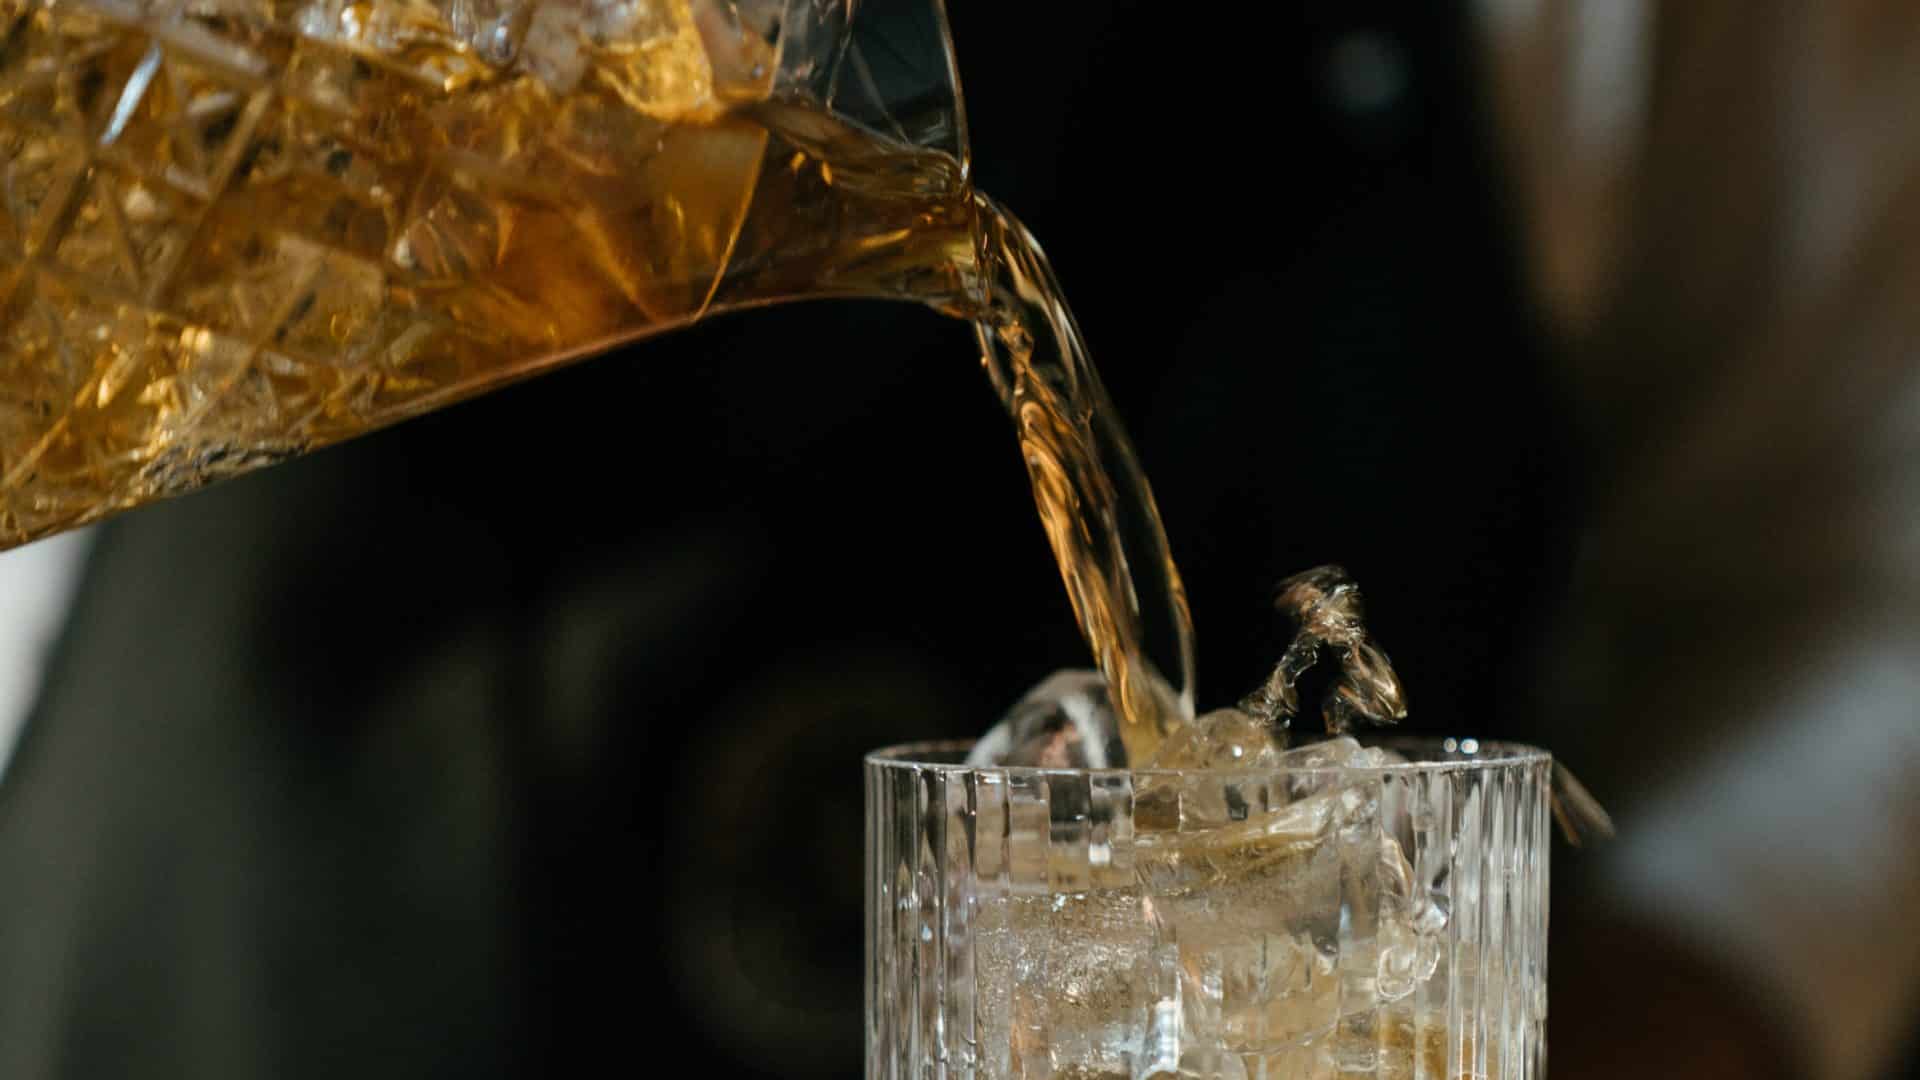 Water caused DUI after overserving alcohol to customers